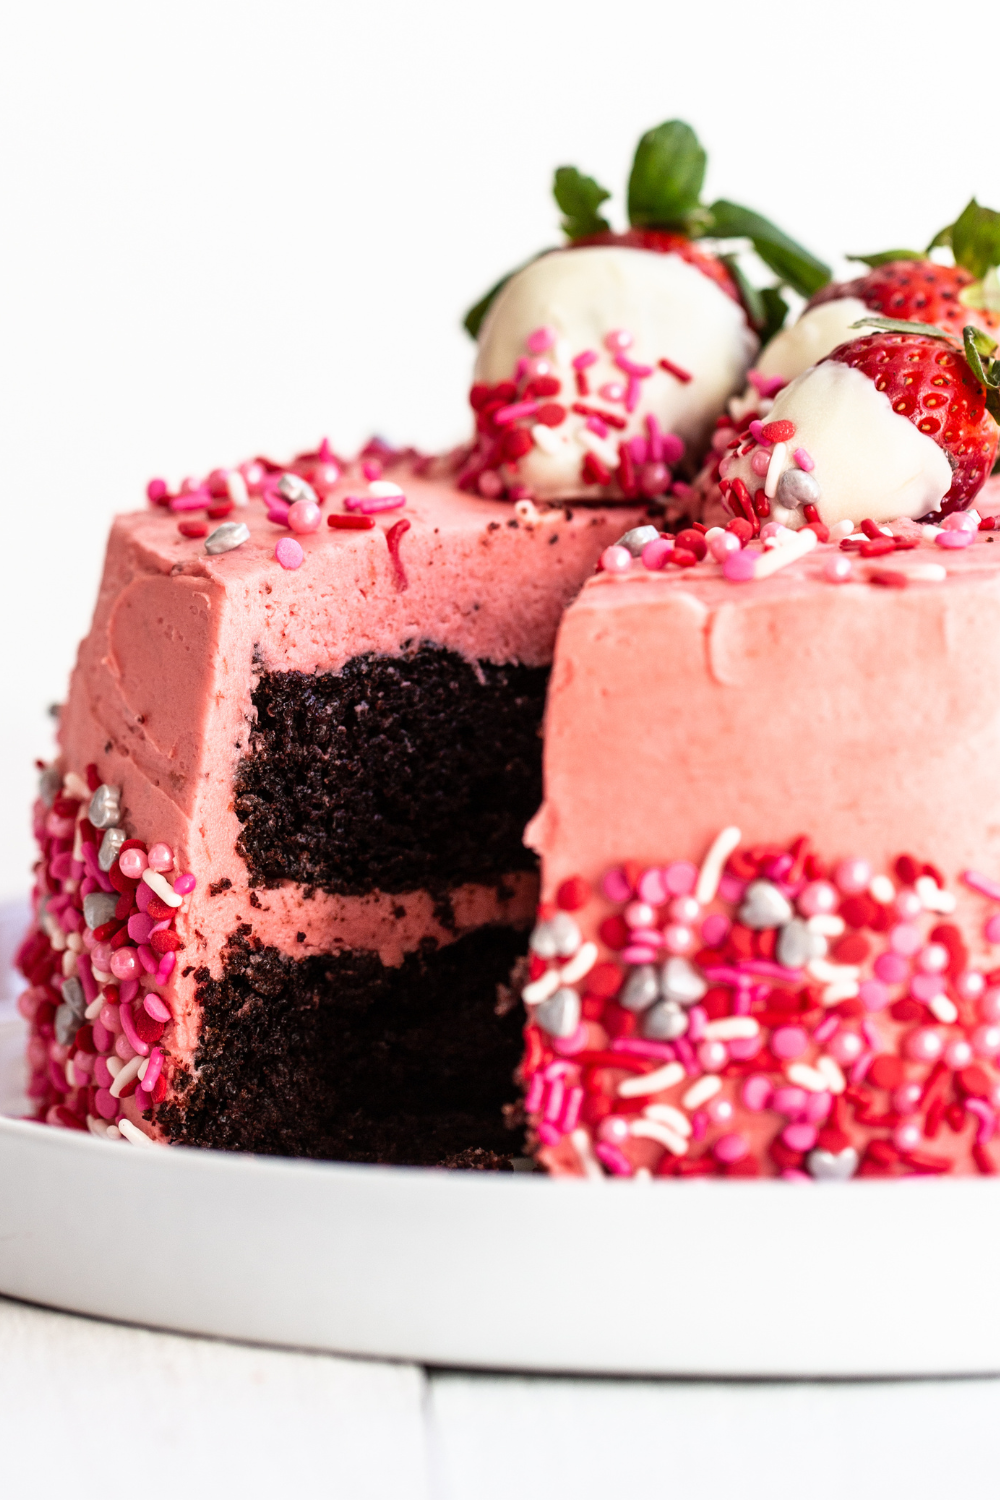 Valentine's Cake has two layers of chocolate sponge cake, sandwiched together with strawberry buttercream and iced in the same frosting, topped with chocolate-covered strawberries.